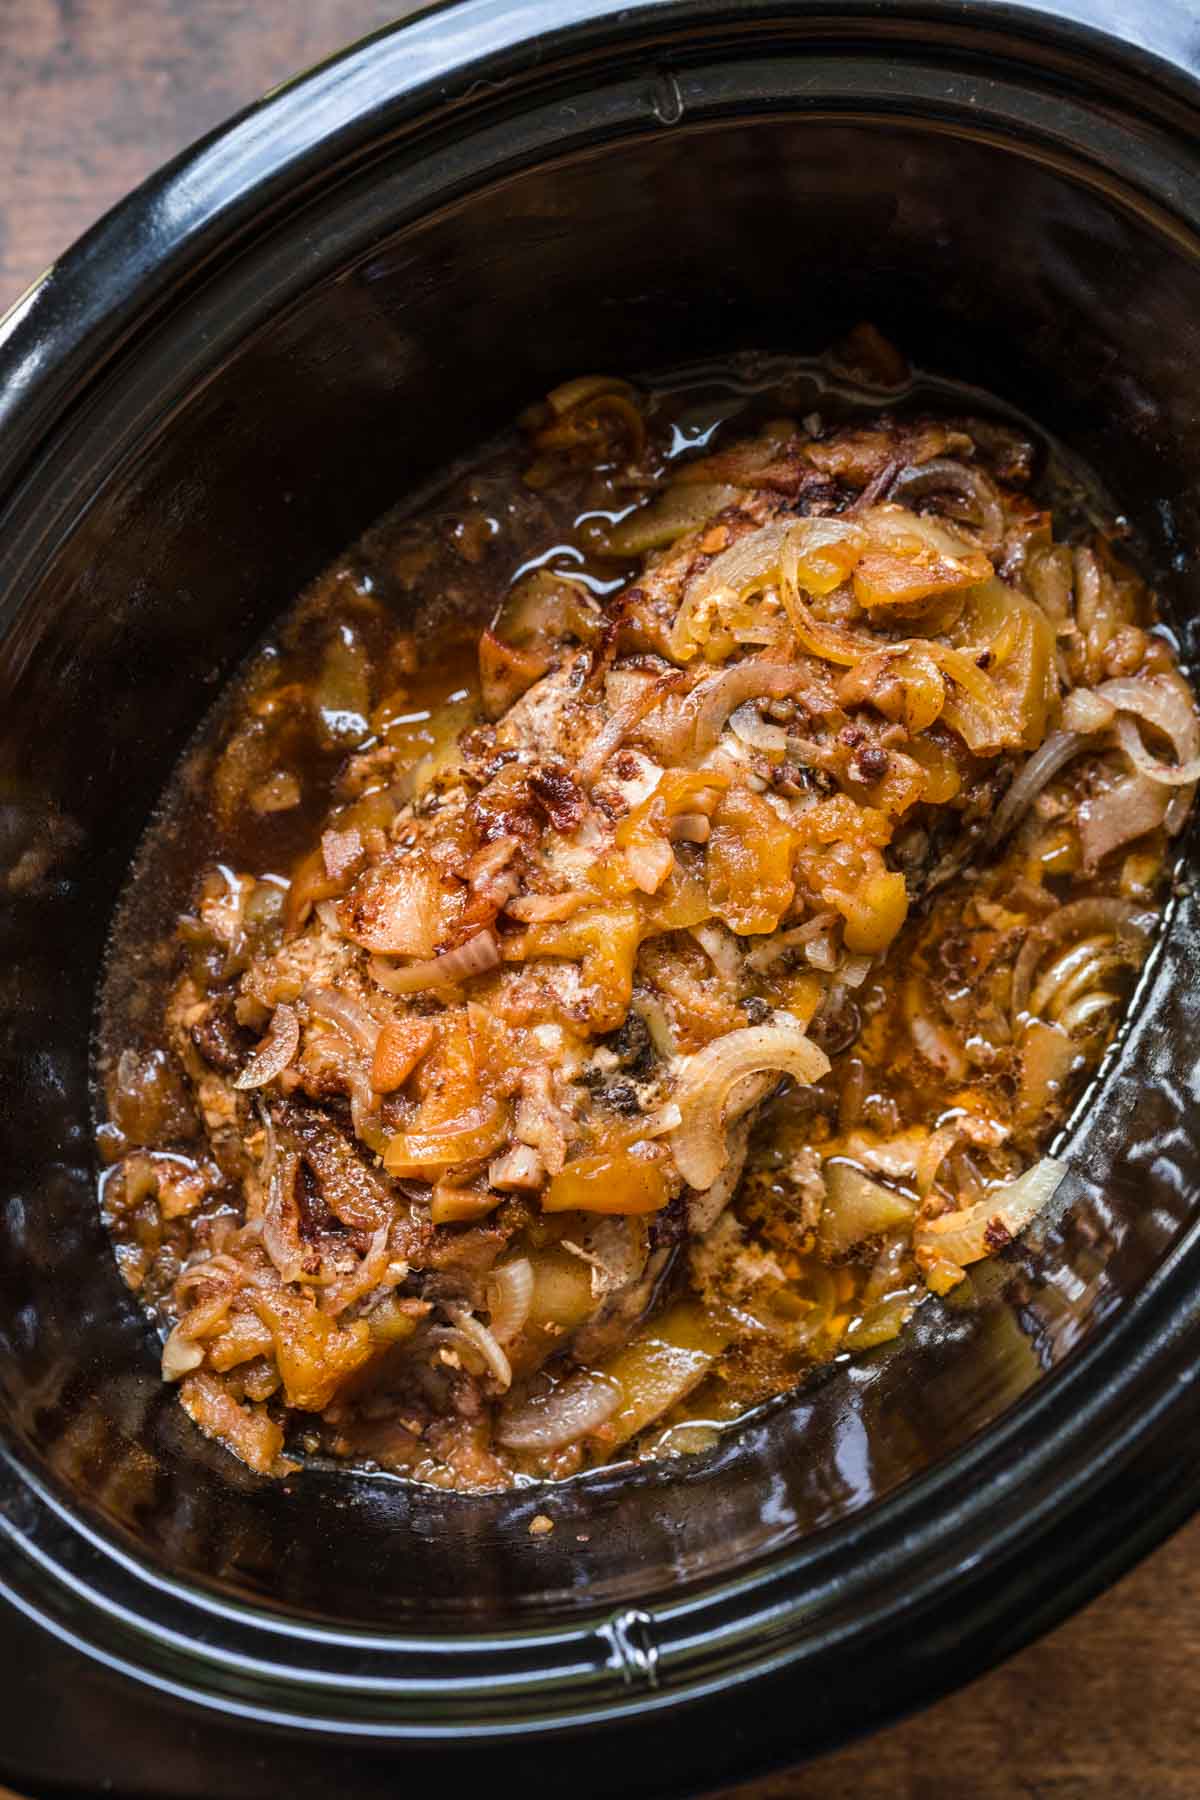 Apple Cinnamon Pork Loin in slow cooker after cooking